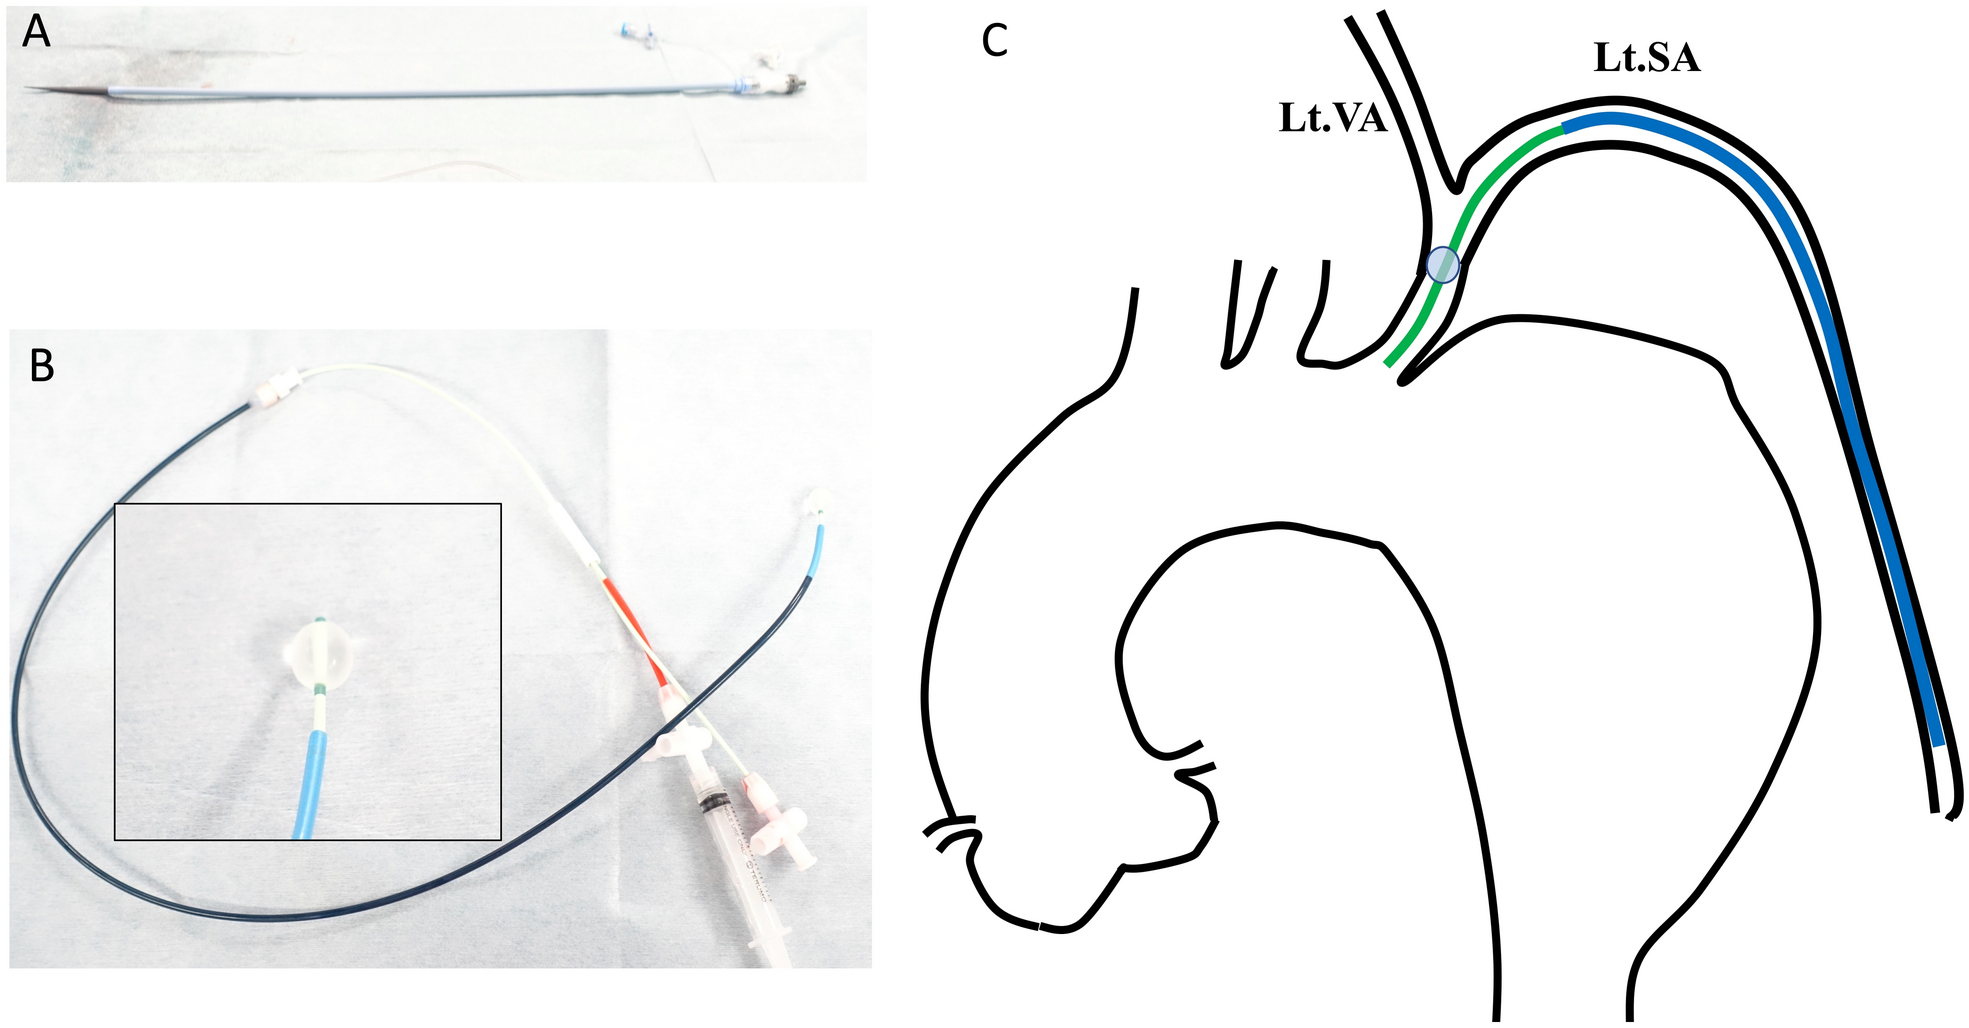 Utilizing a long sheath to minimize atheroma manipulation (minimal manipulation approach) during Zone 1 and 2 thoracic endovascular aortic repair with a shaggy aorta